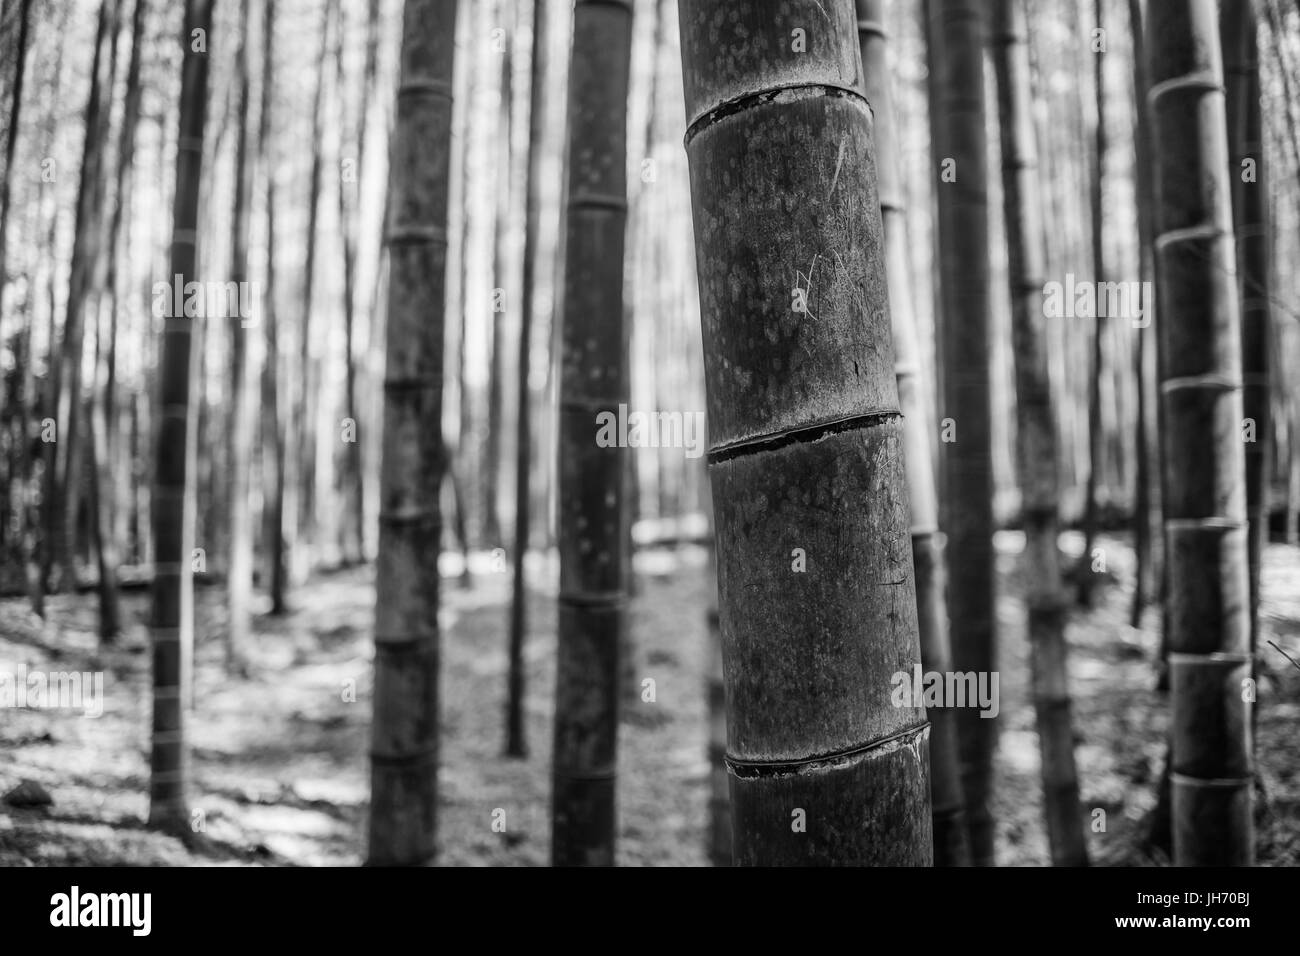 Abstract photos Black and White Stock Photos & Images - Alamy